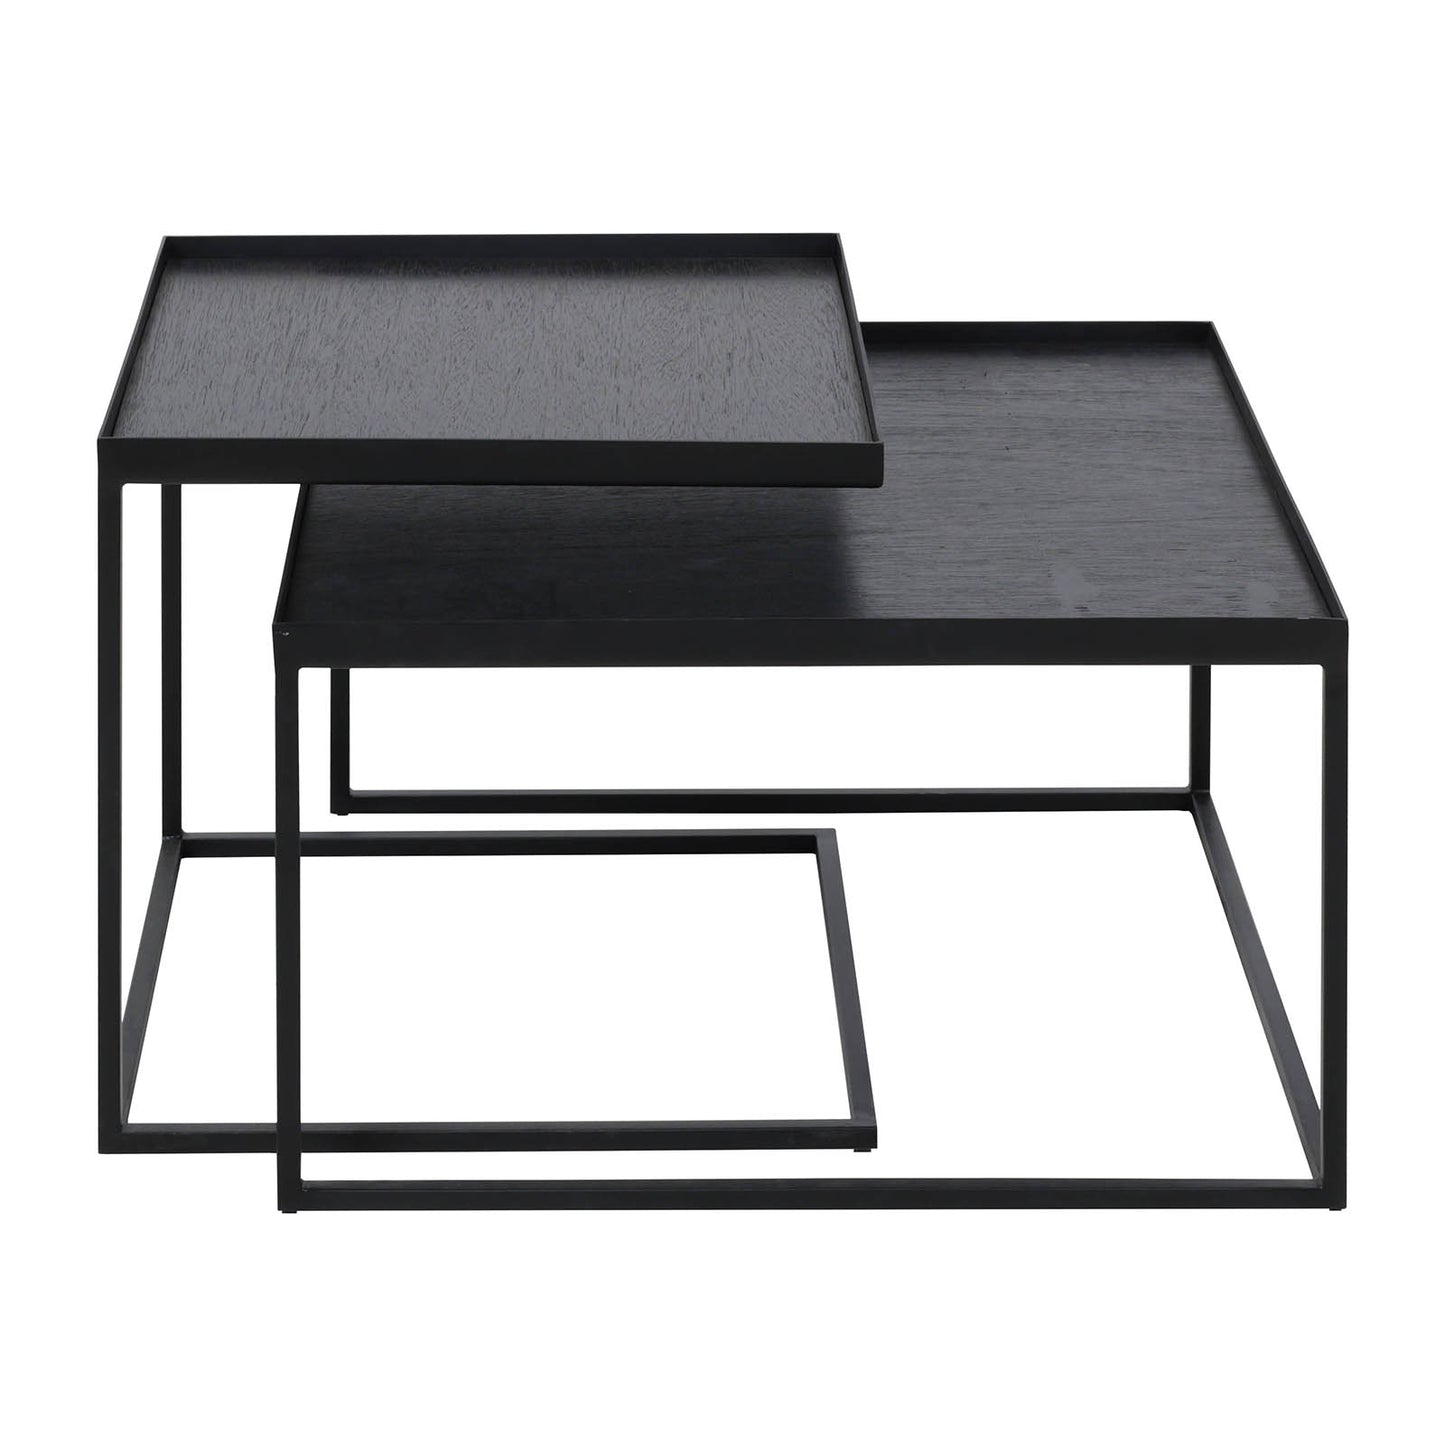 Square tray coffee table set (trays not included)